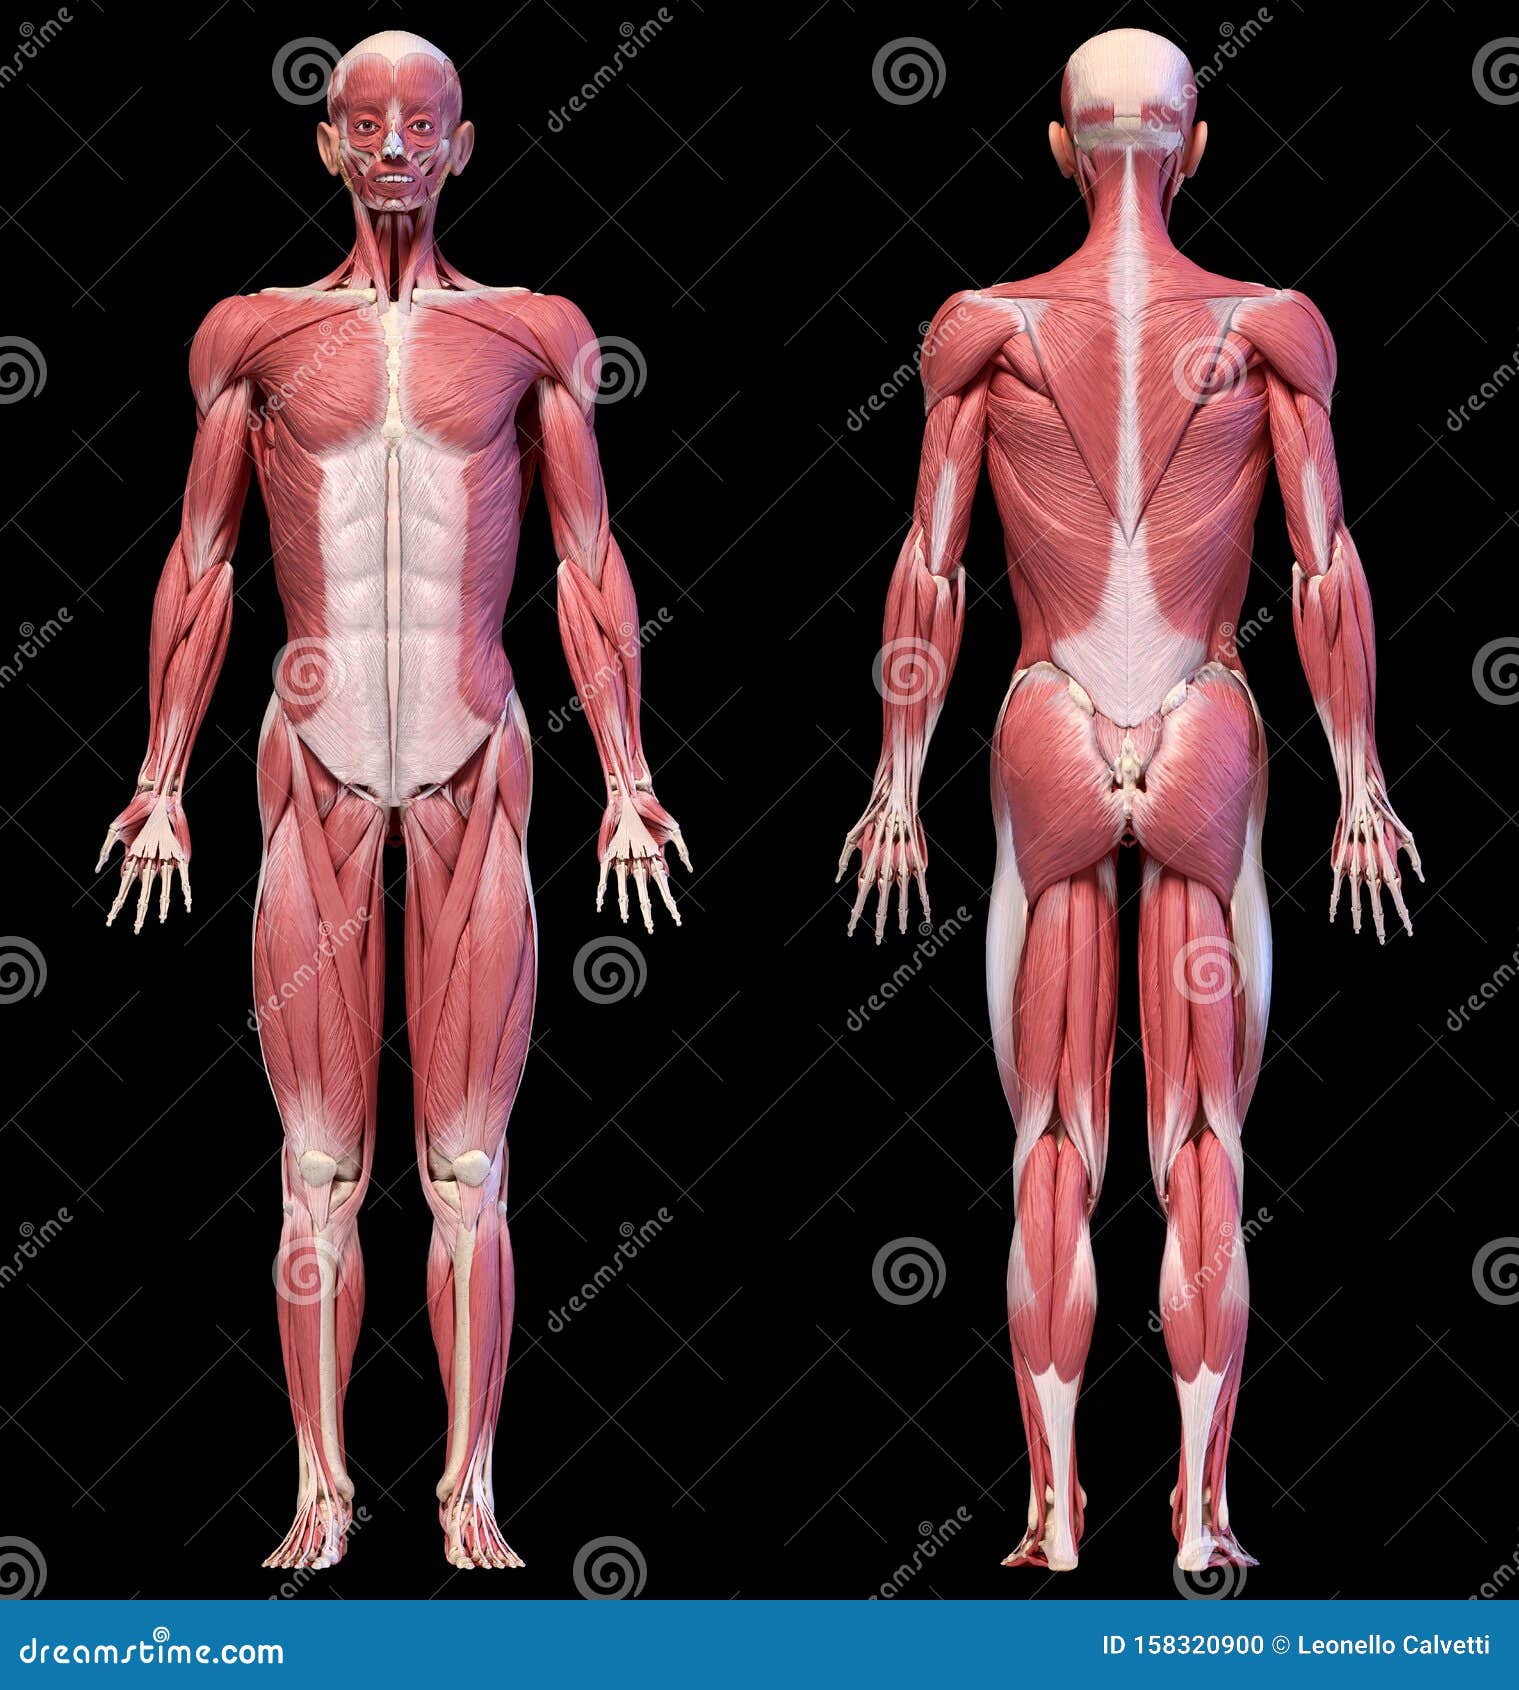 Human Body, Full Figure Male Muscular System, Front and Back Views